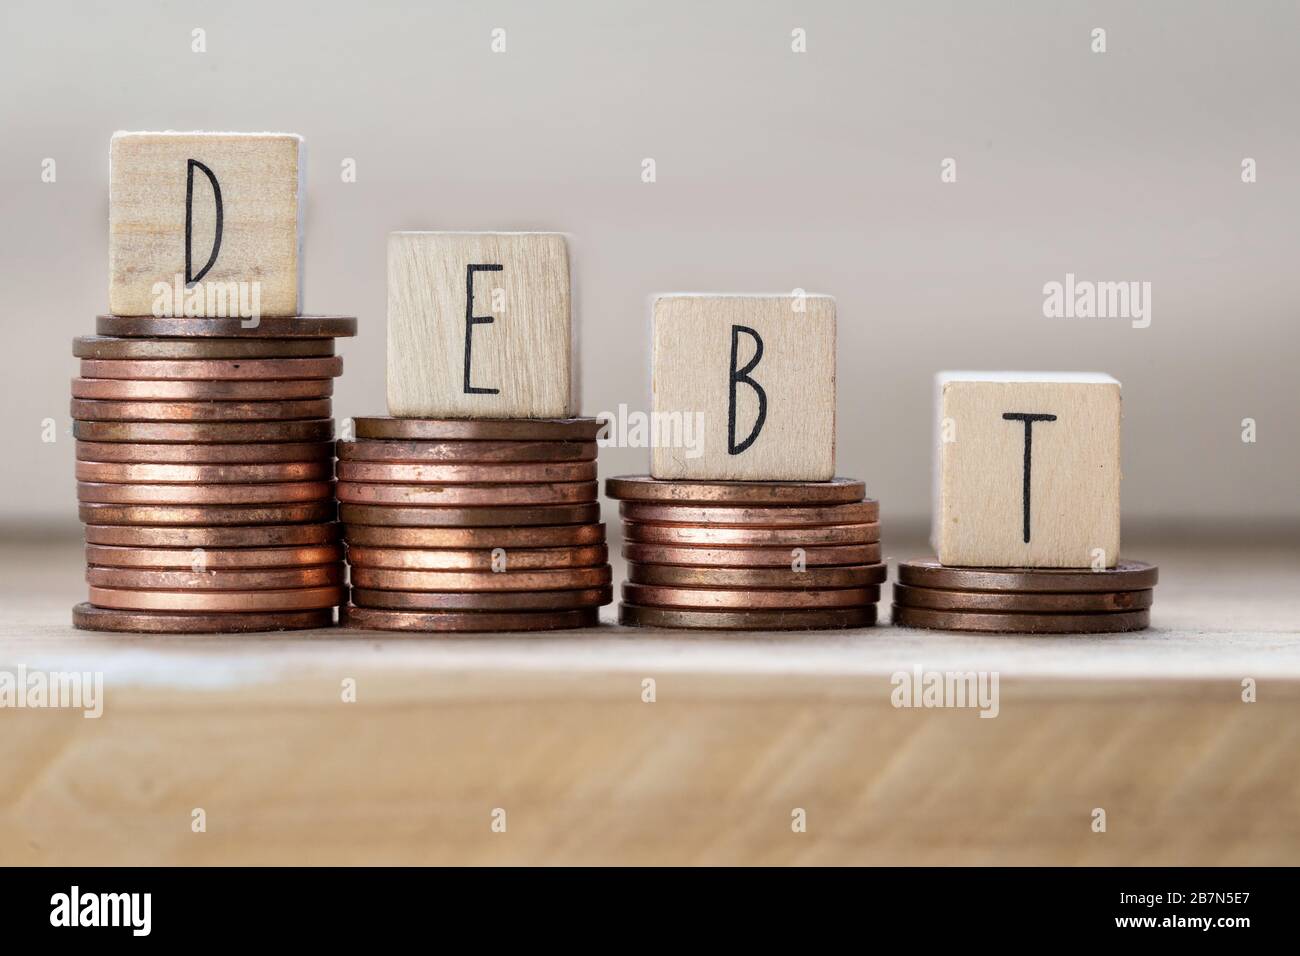 Debt written on wooden cubes with letters, money piles of coins, money climbing stairs wooden background, business concept Stock Photo